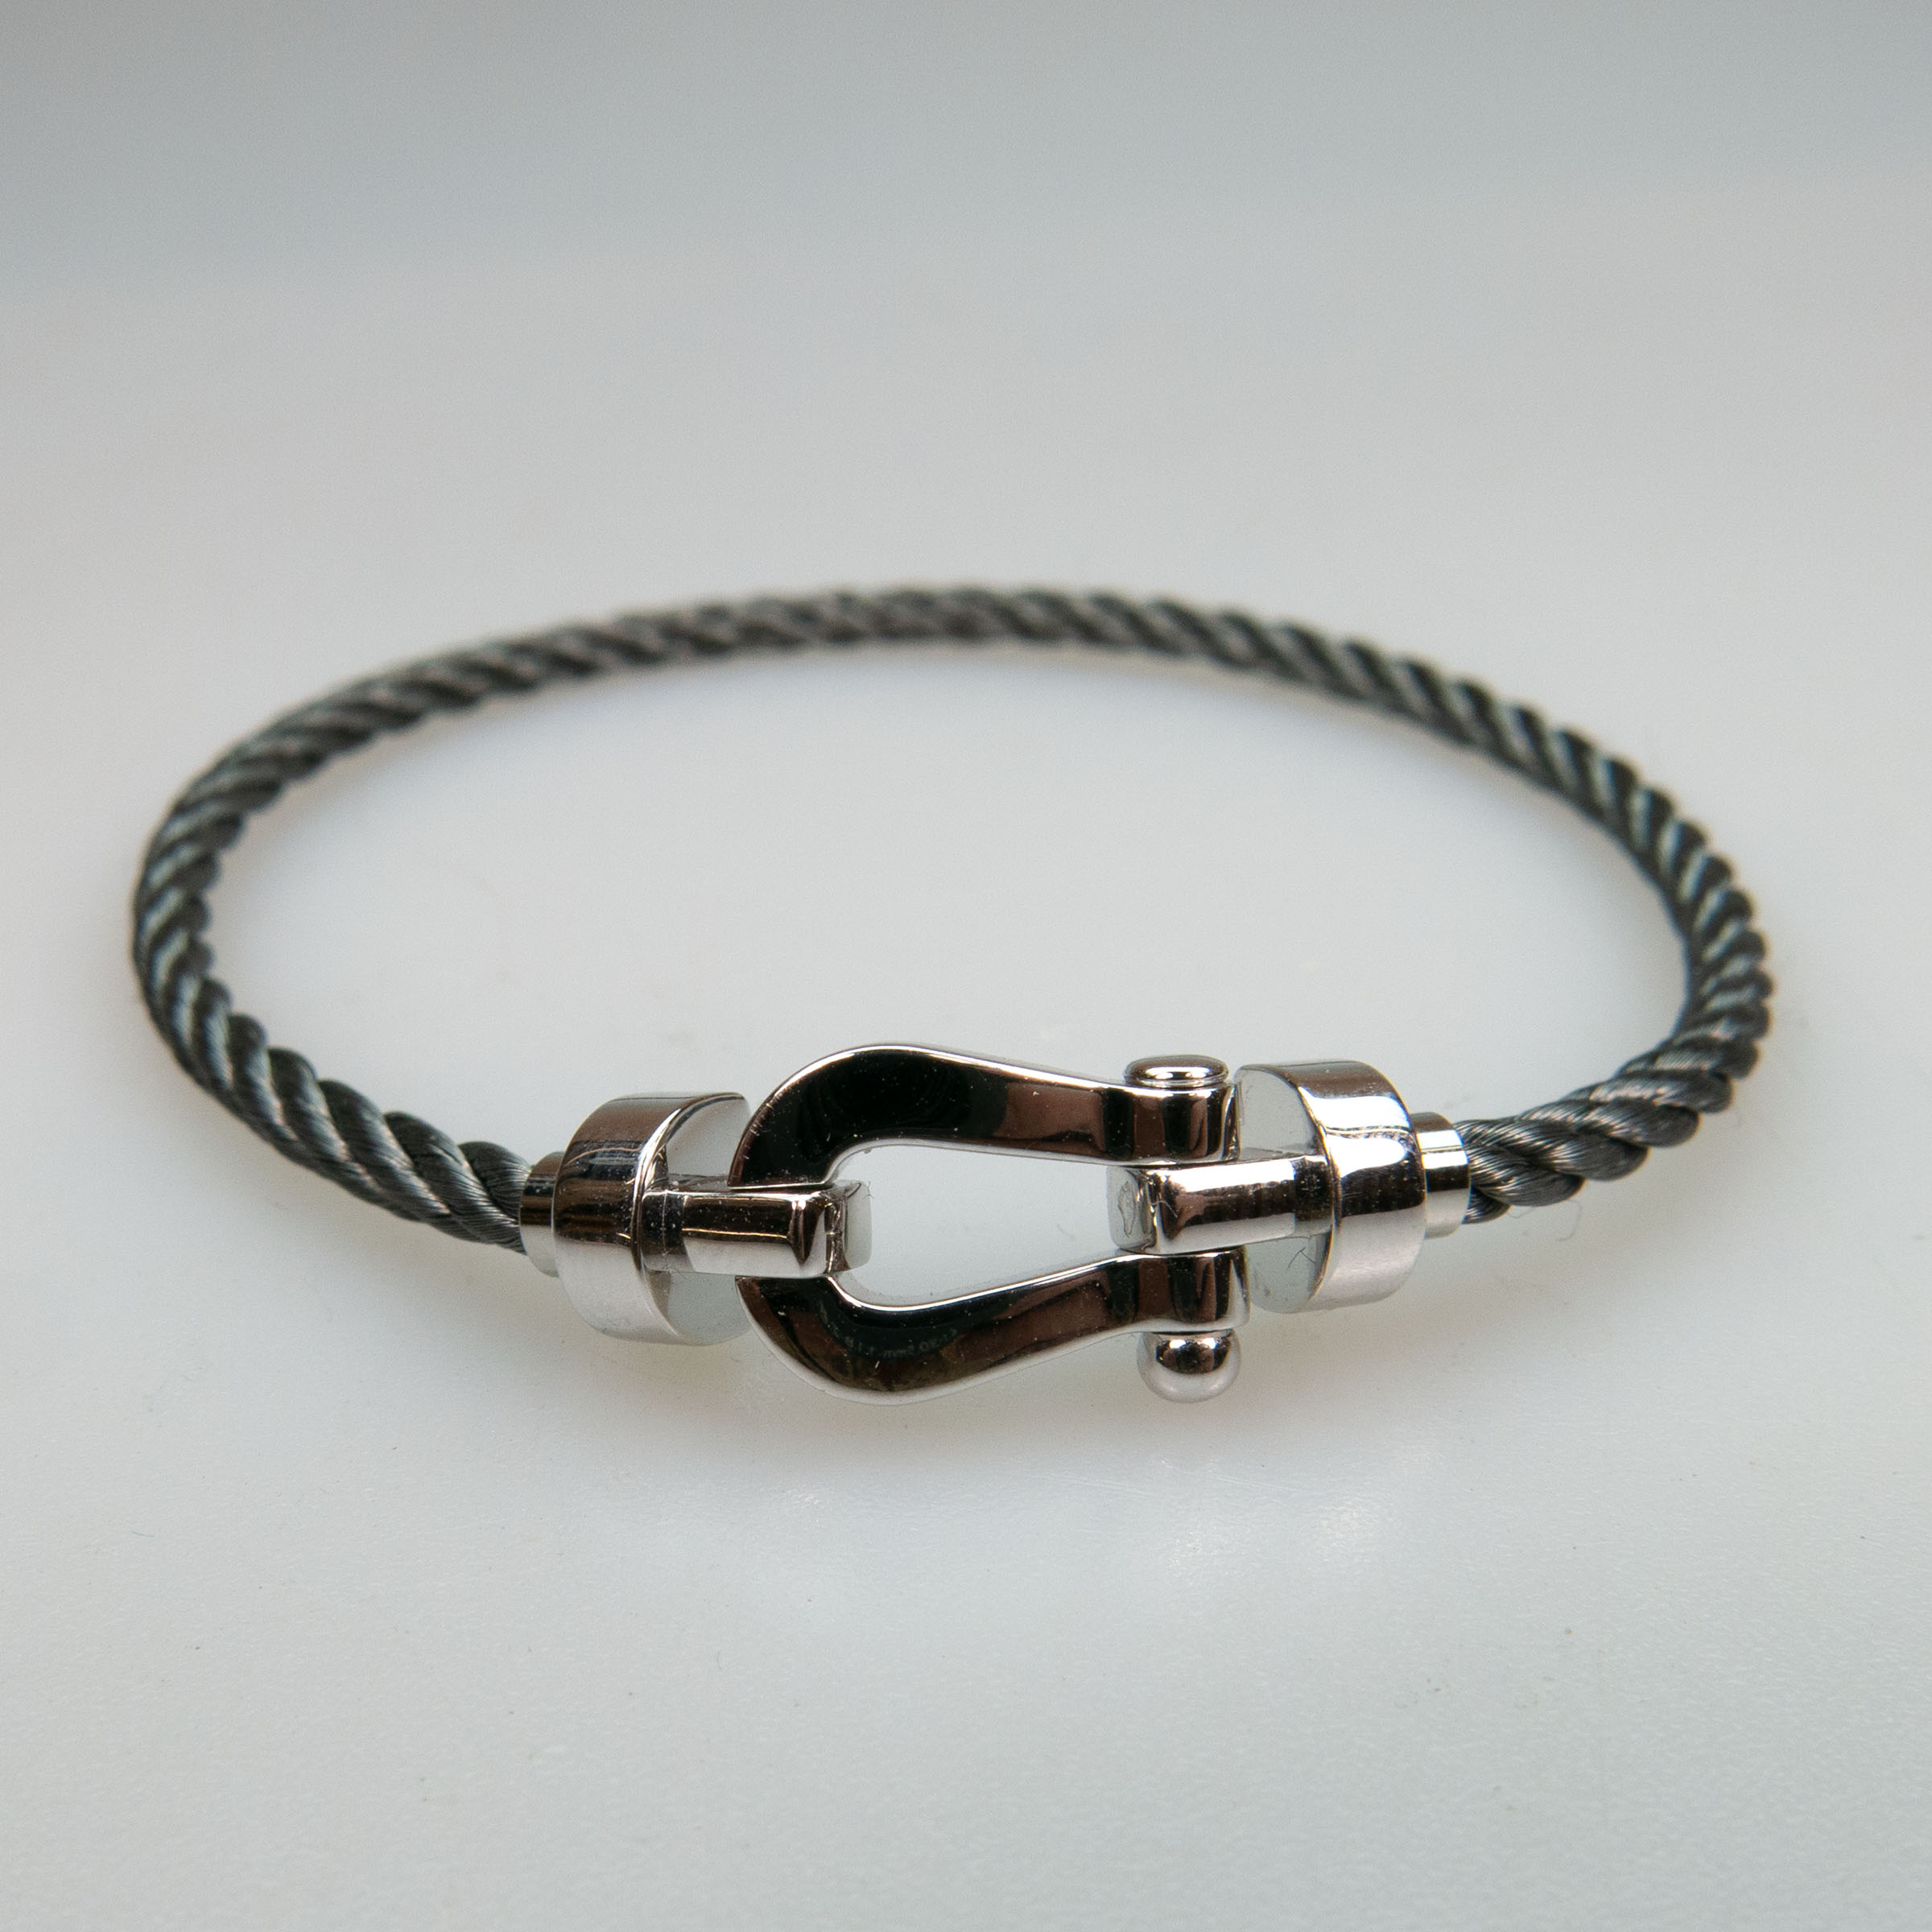 Fred Force 10 Stainless Steel And 18k White Gold Bracelet